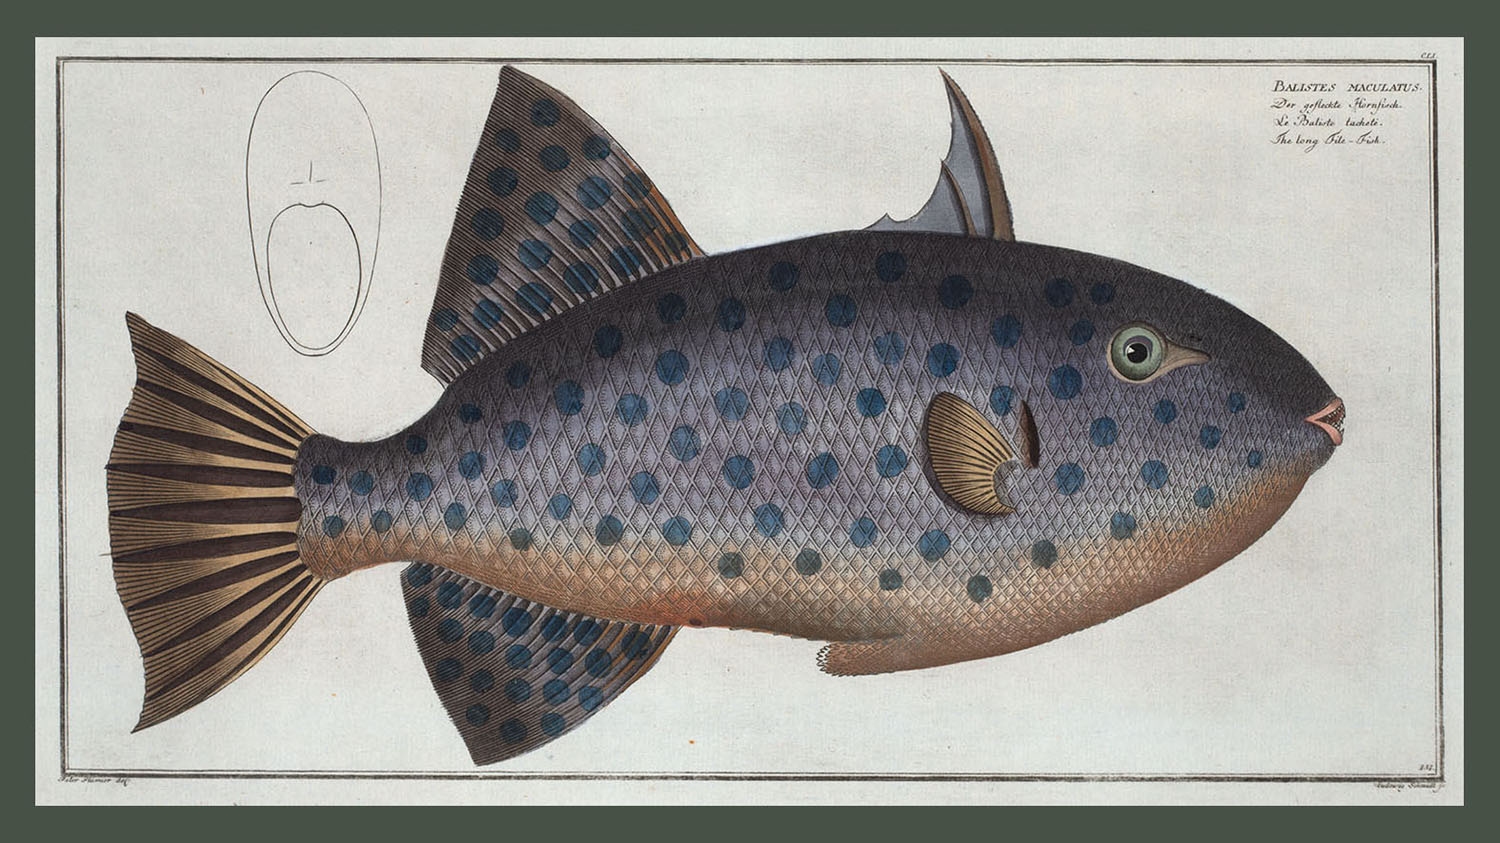 <i>Balistes maculatus, The long File-Fish</i>. (Courtesy Rare Book Division, The New York Public Library, Digital Collections.)